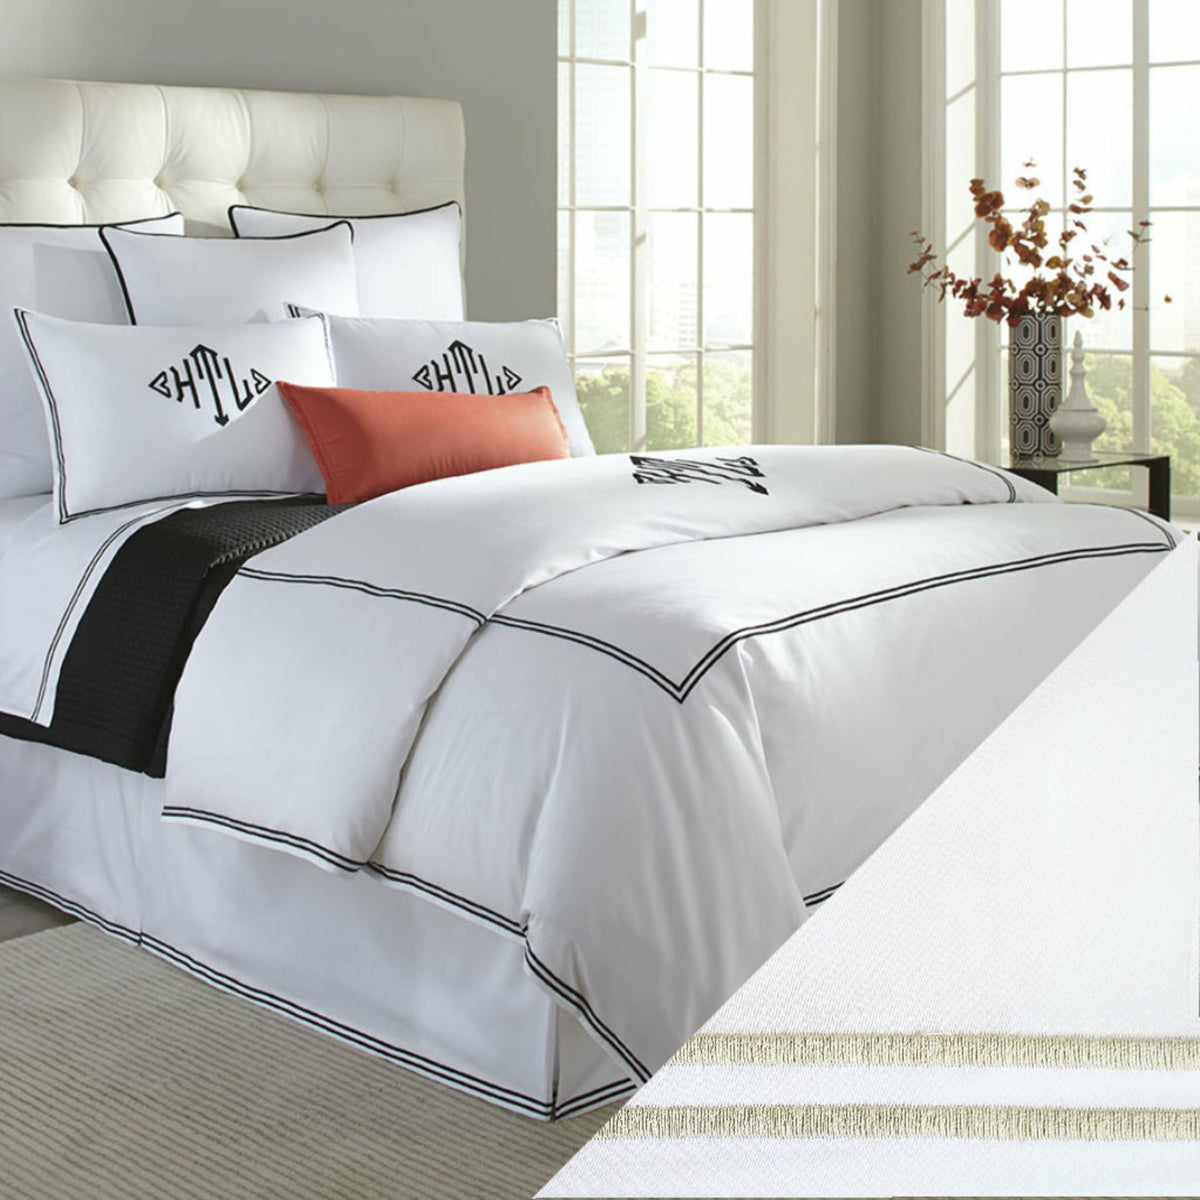 Home Treasures Madison Royal Sateen Hotel Bedding White/Candlelight Fine Linens